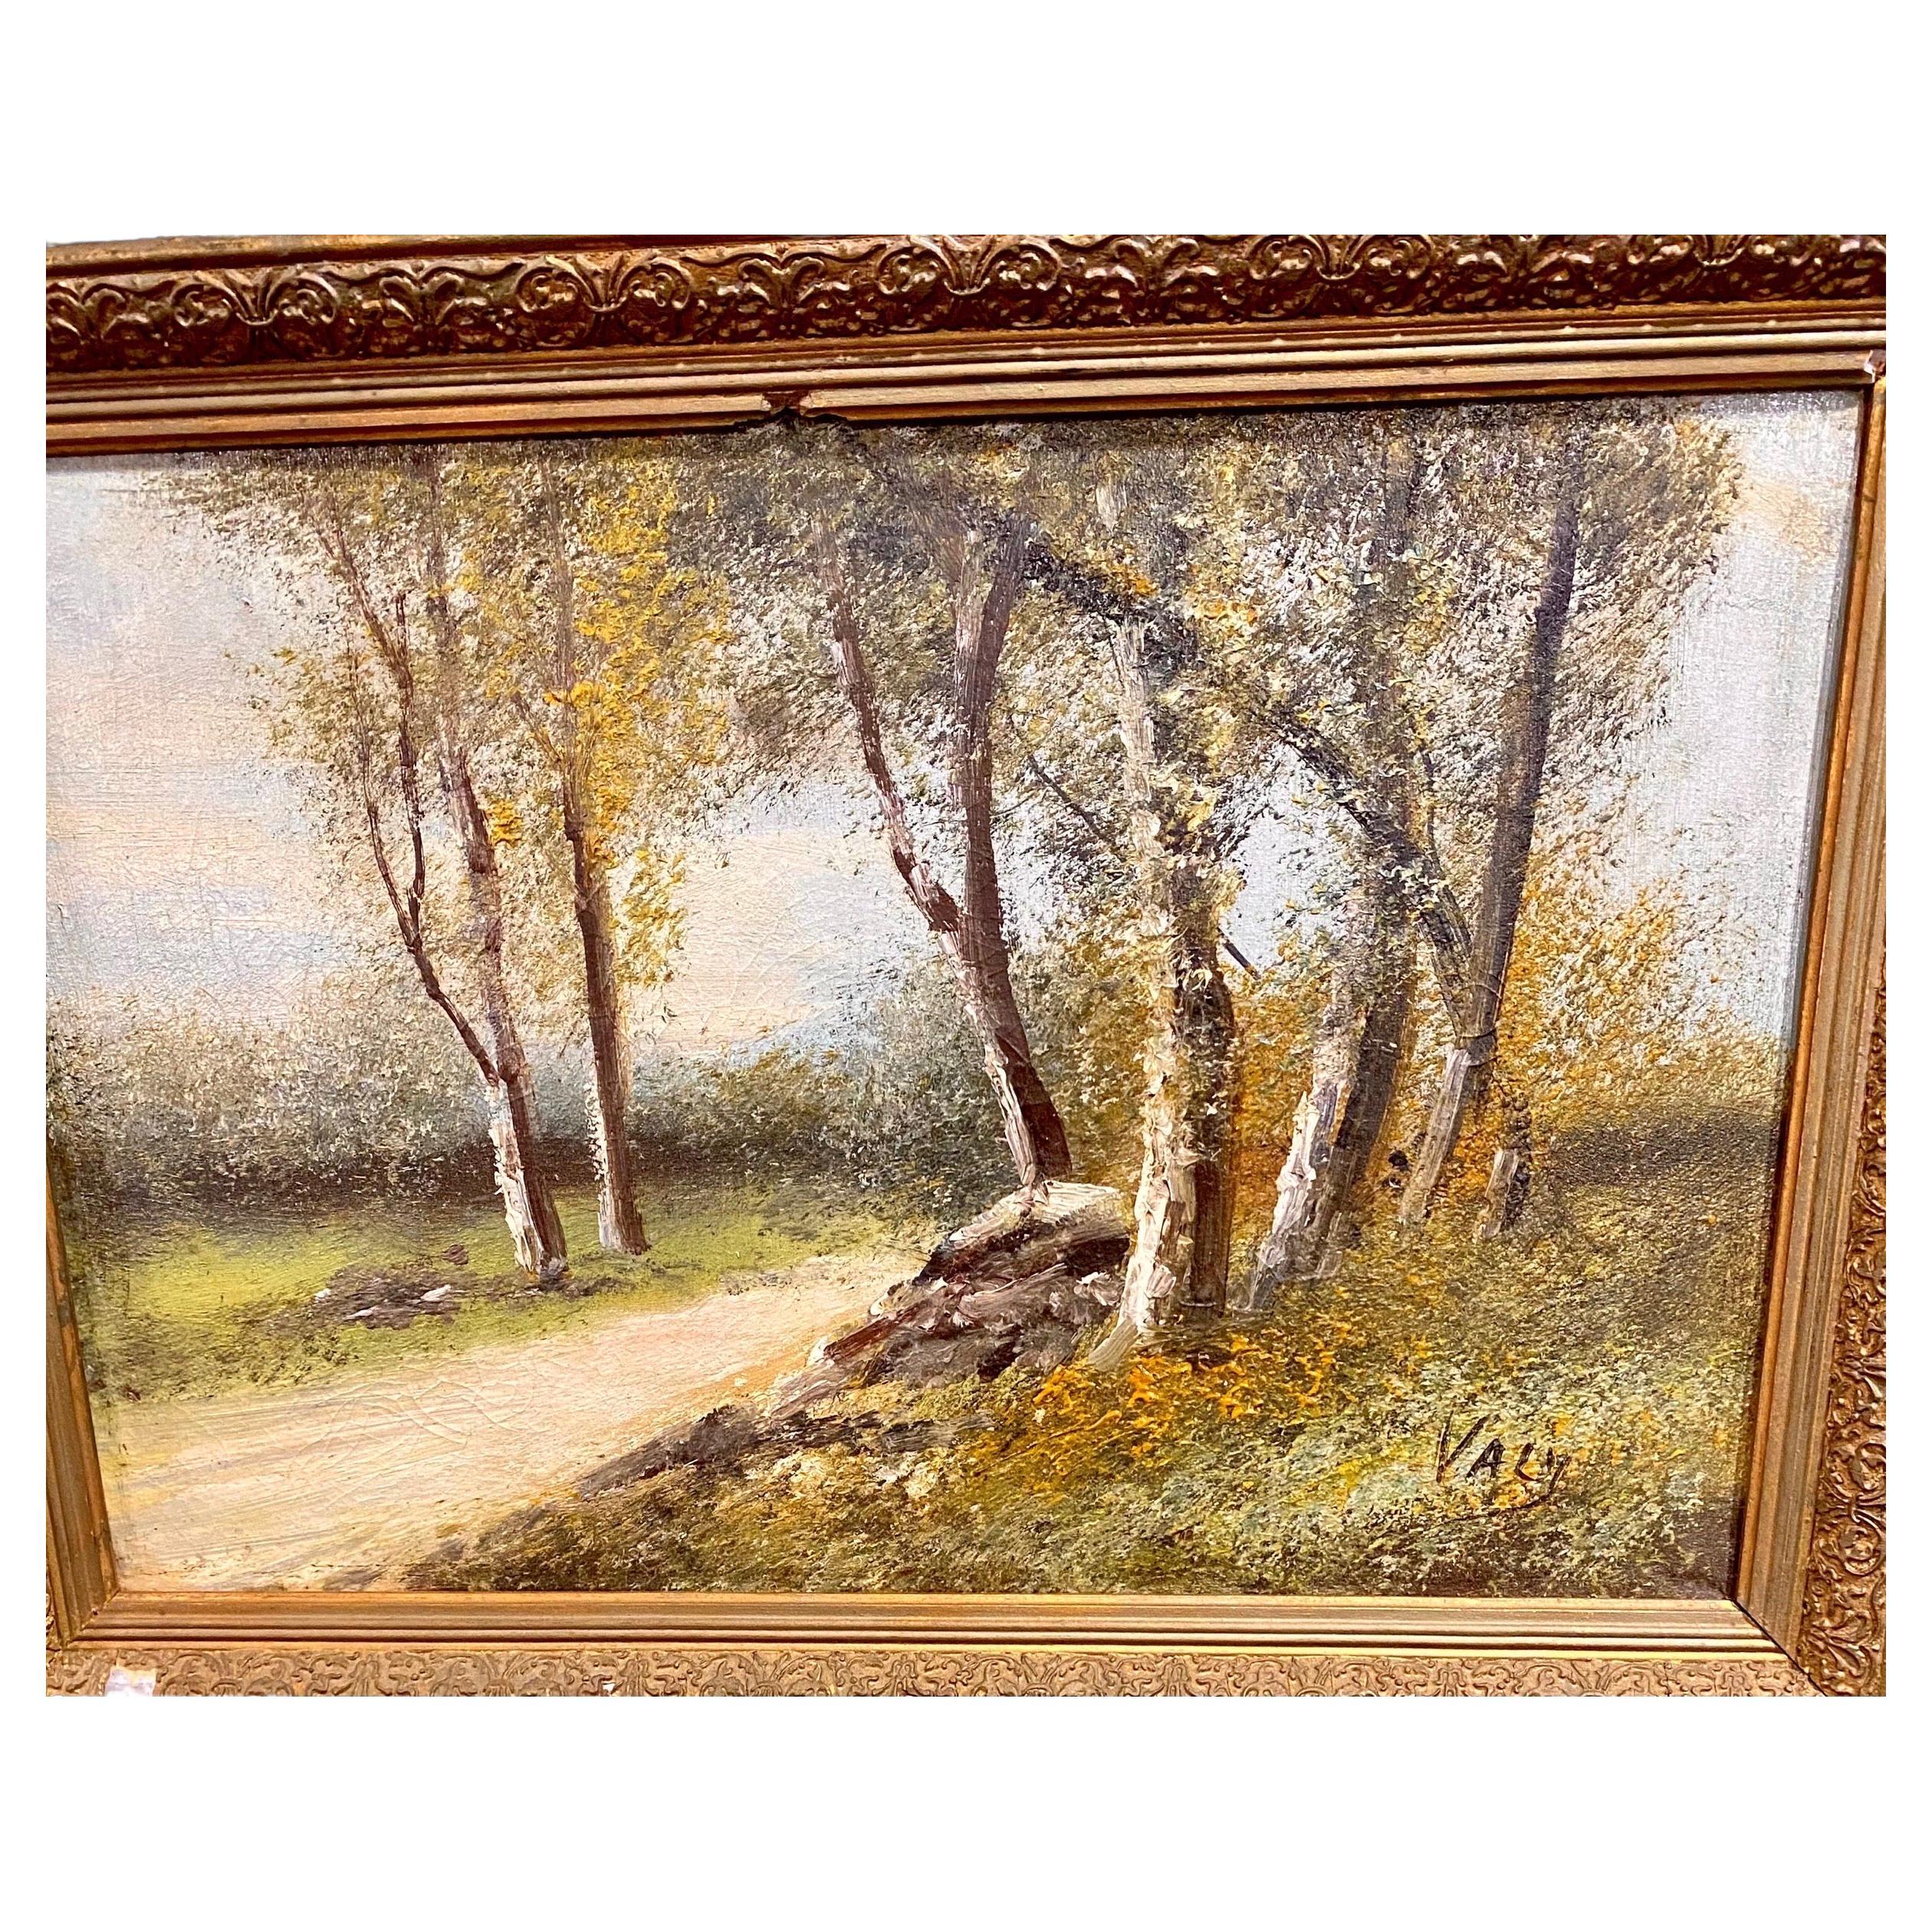 A charming antique French oil on canvas of an atmospheric landscape in a period gesso and wood frame, signed “Valey”. Lovely dappled sunlight though the leaves, very serene.

Canvas: 16” wide, 10.5” high.